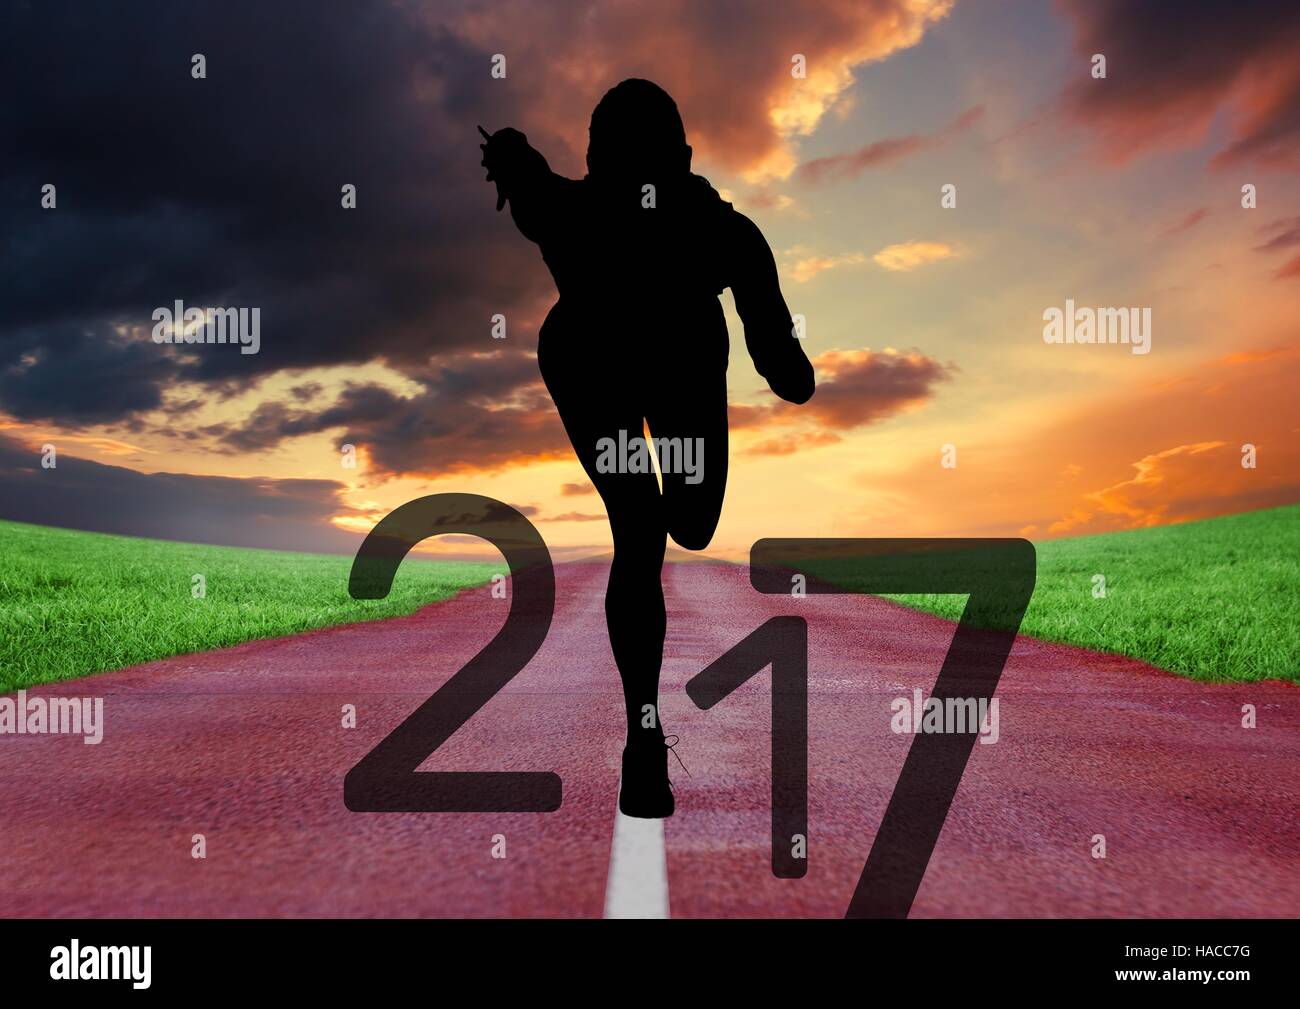 Silhouette of running athlete forming 2017 new year sign 3D Stock Photo